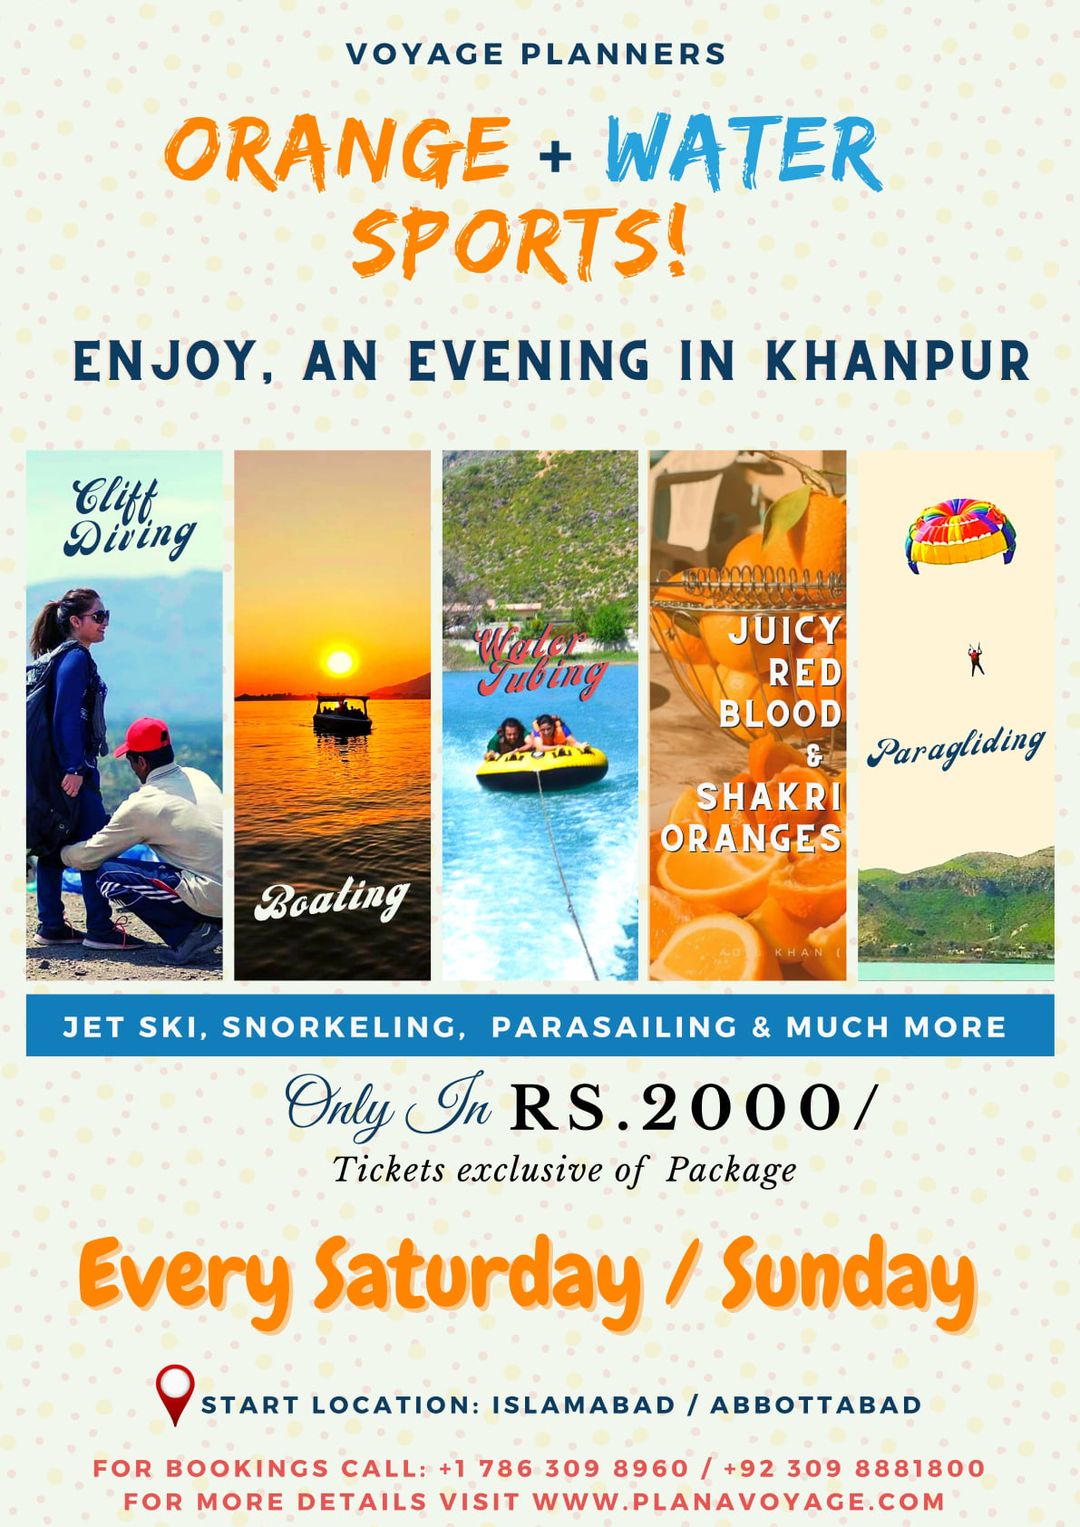 Khanpur Trip with Voyage Planners